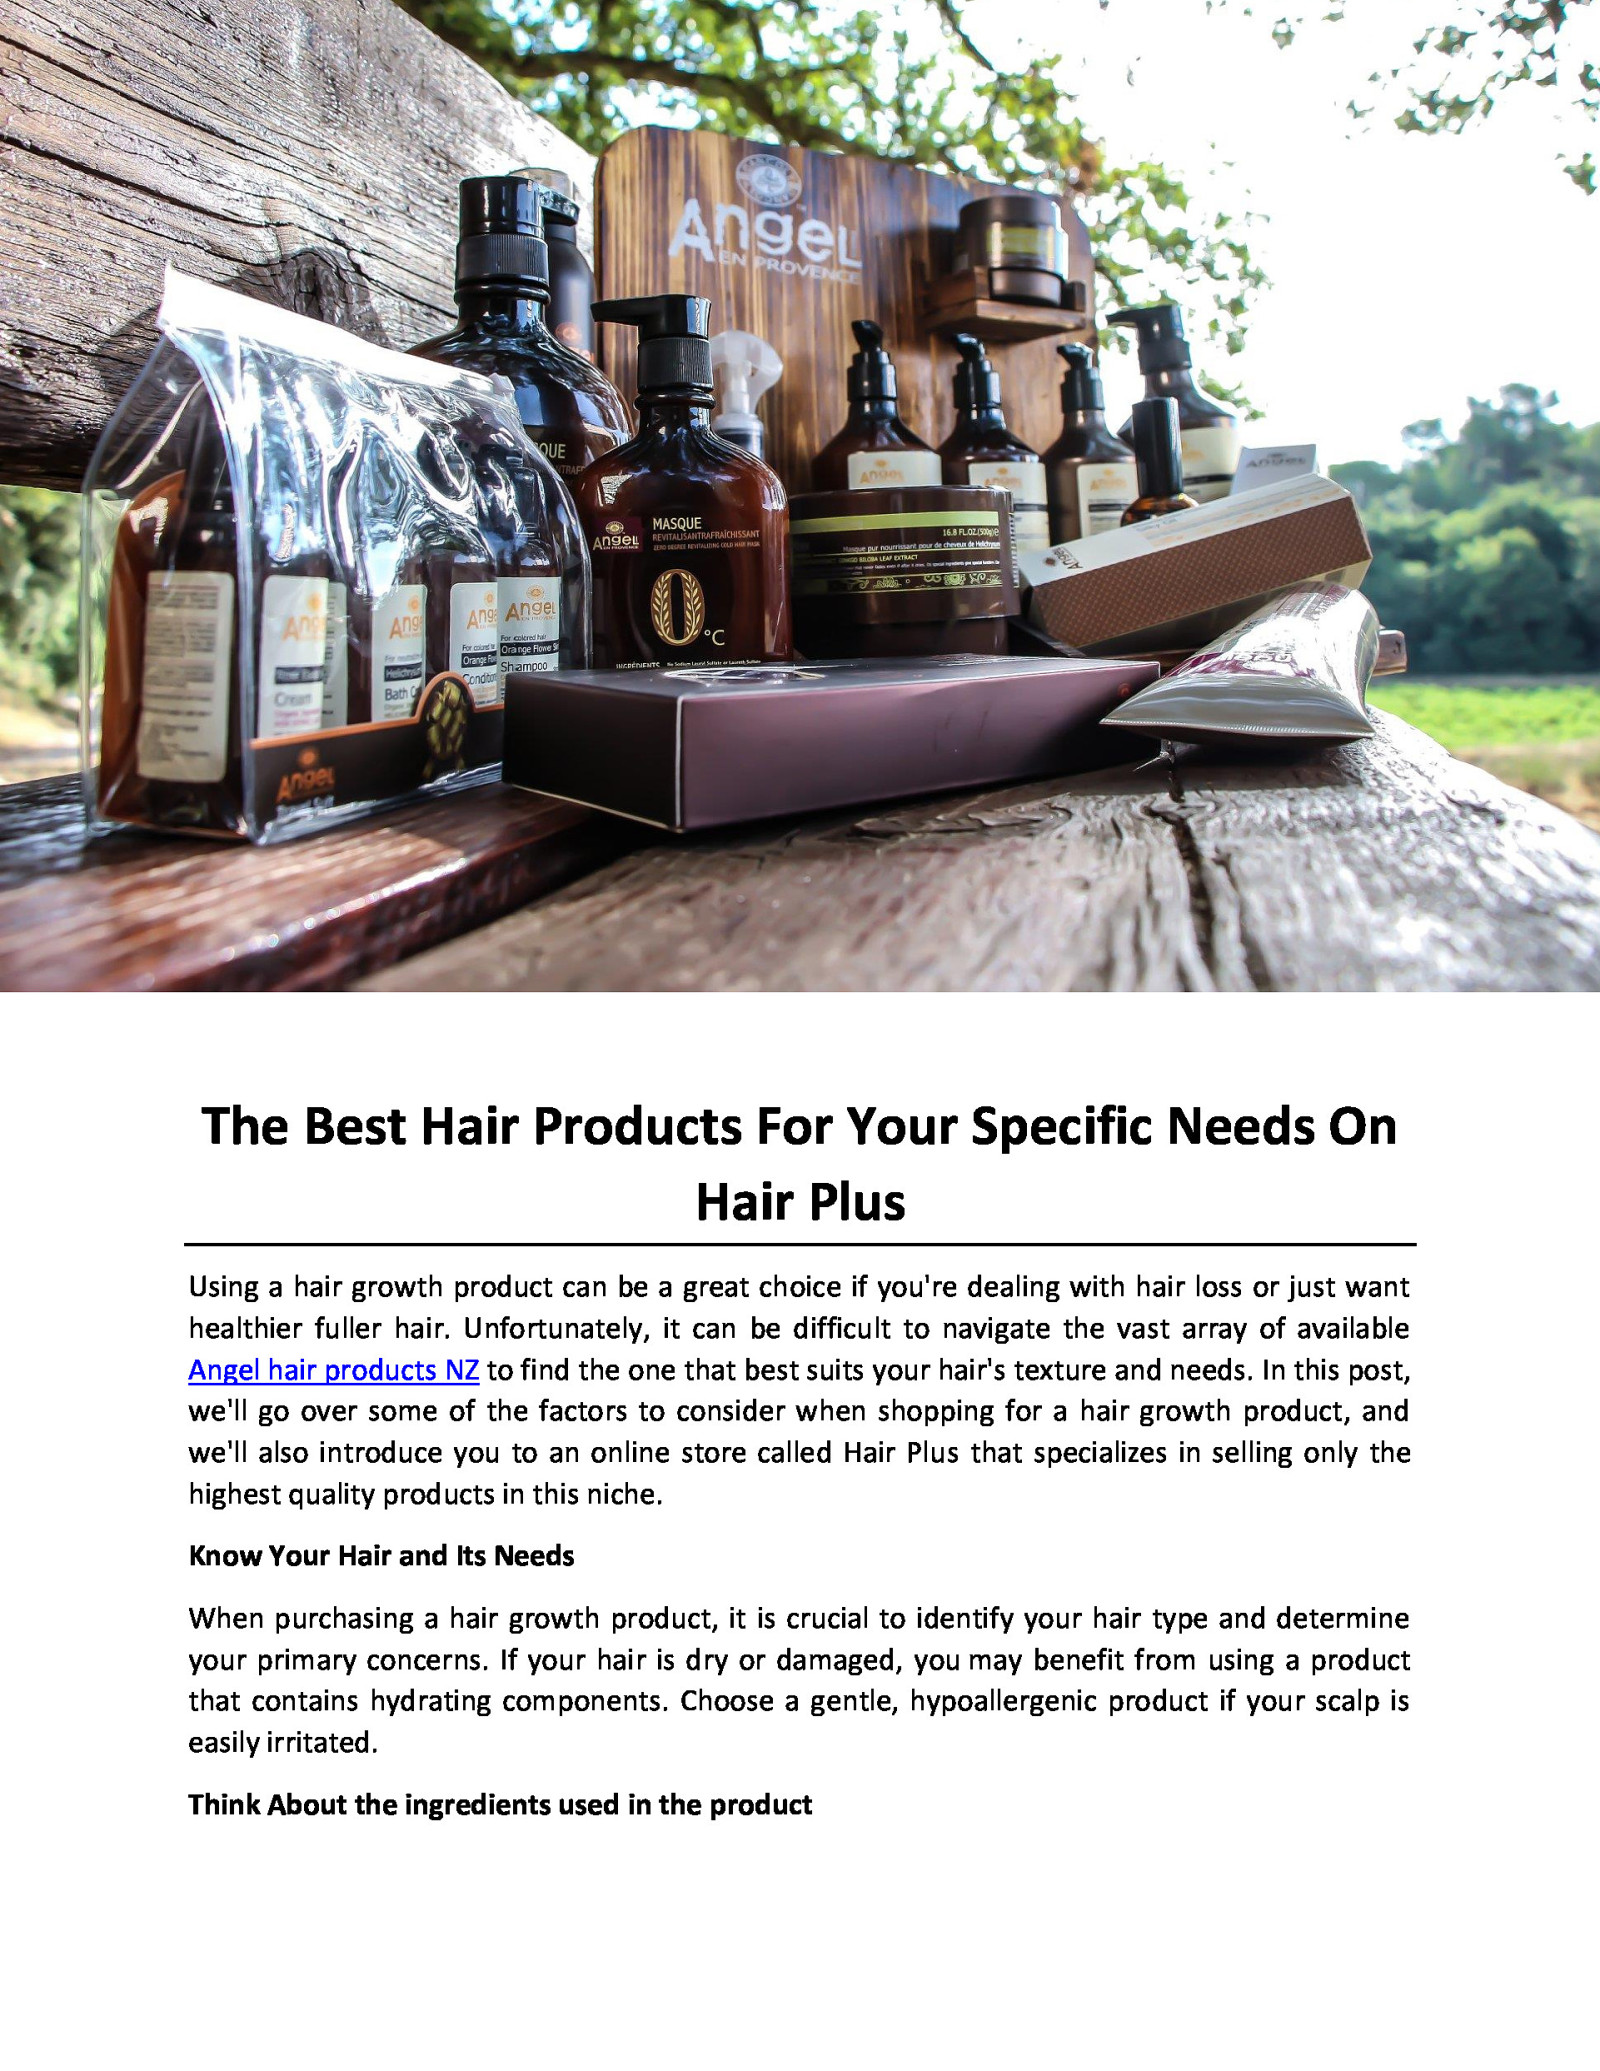 The Best Hair Products For Your Specific Needs On Hair Plus